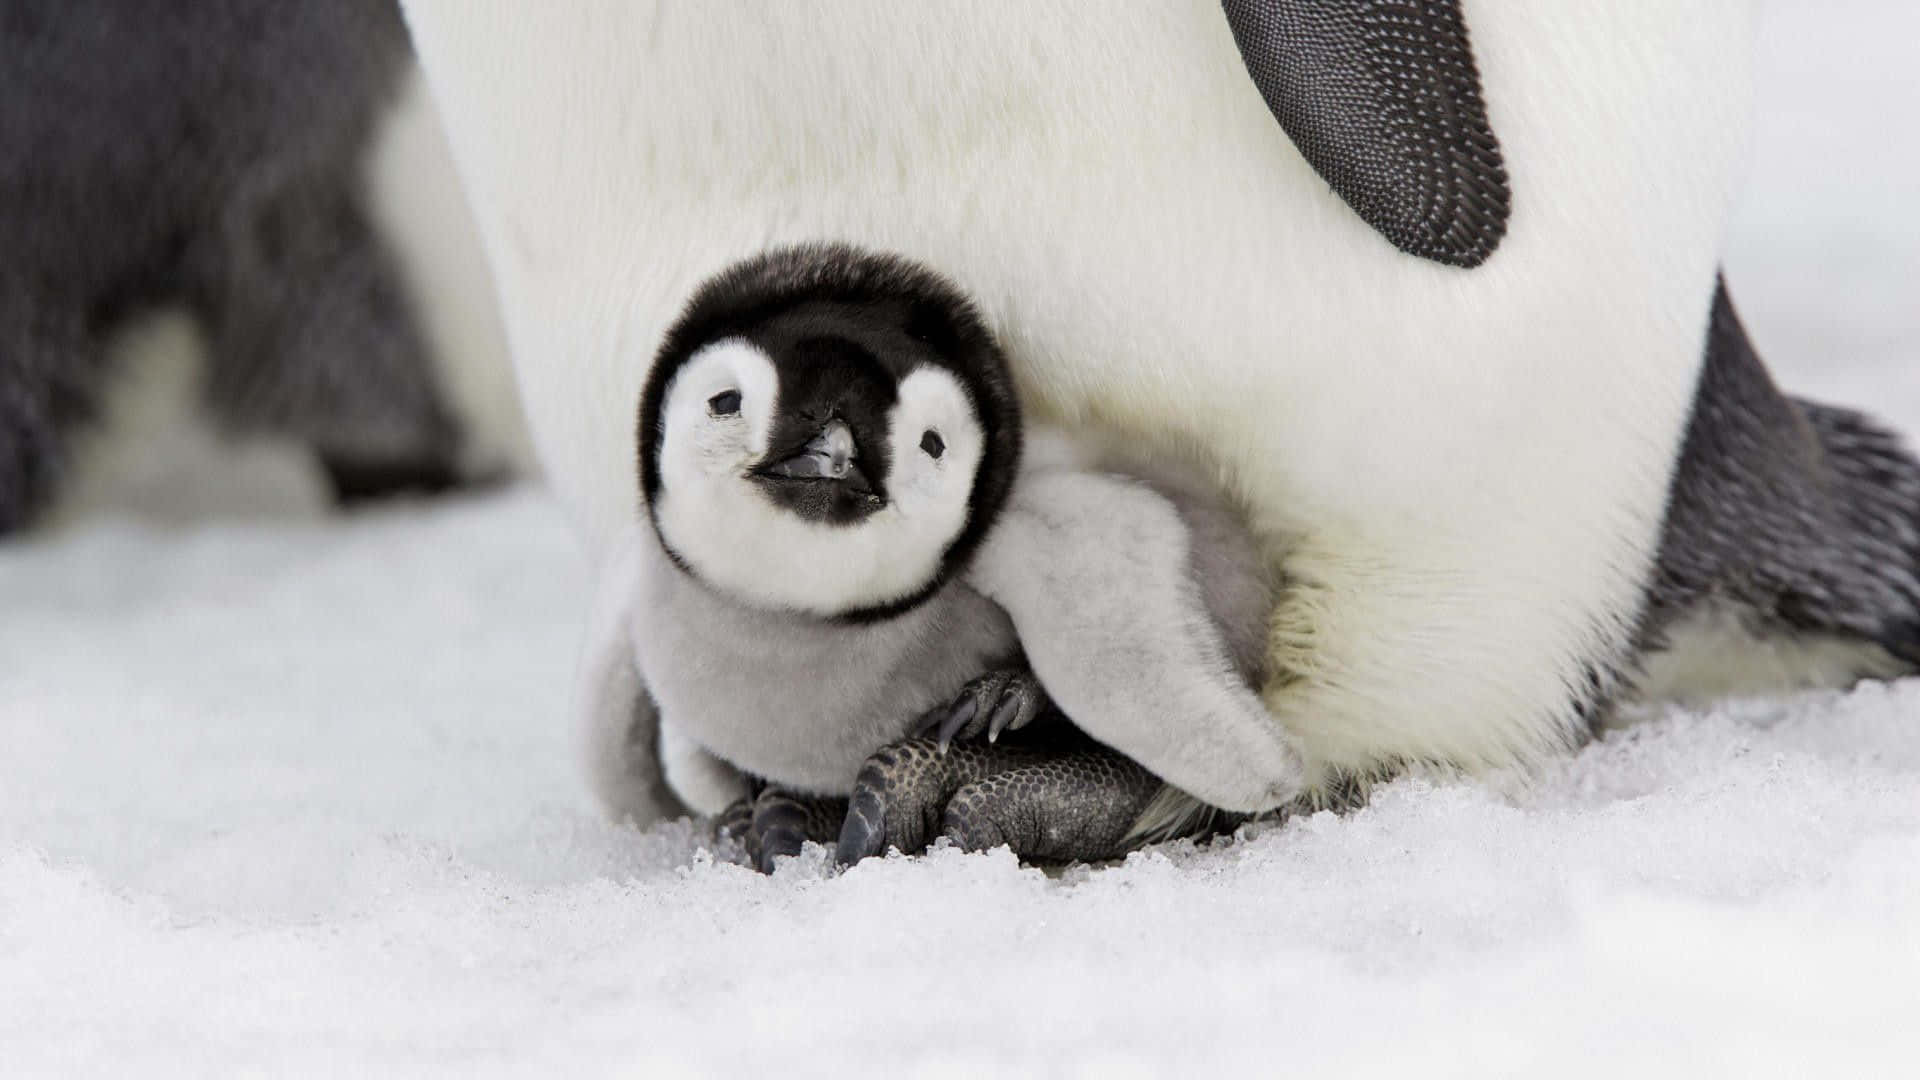 A Baby Penguin Is Sitting On Its Mother's Back